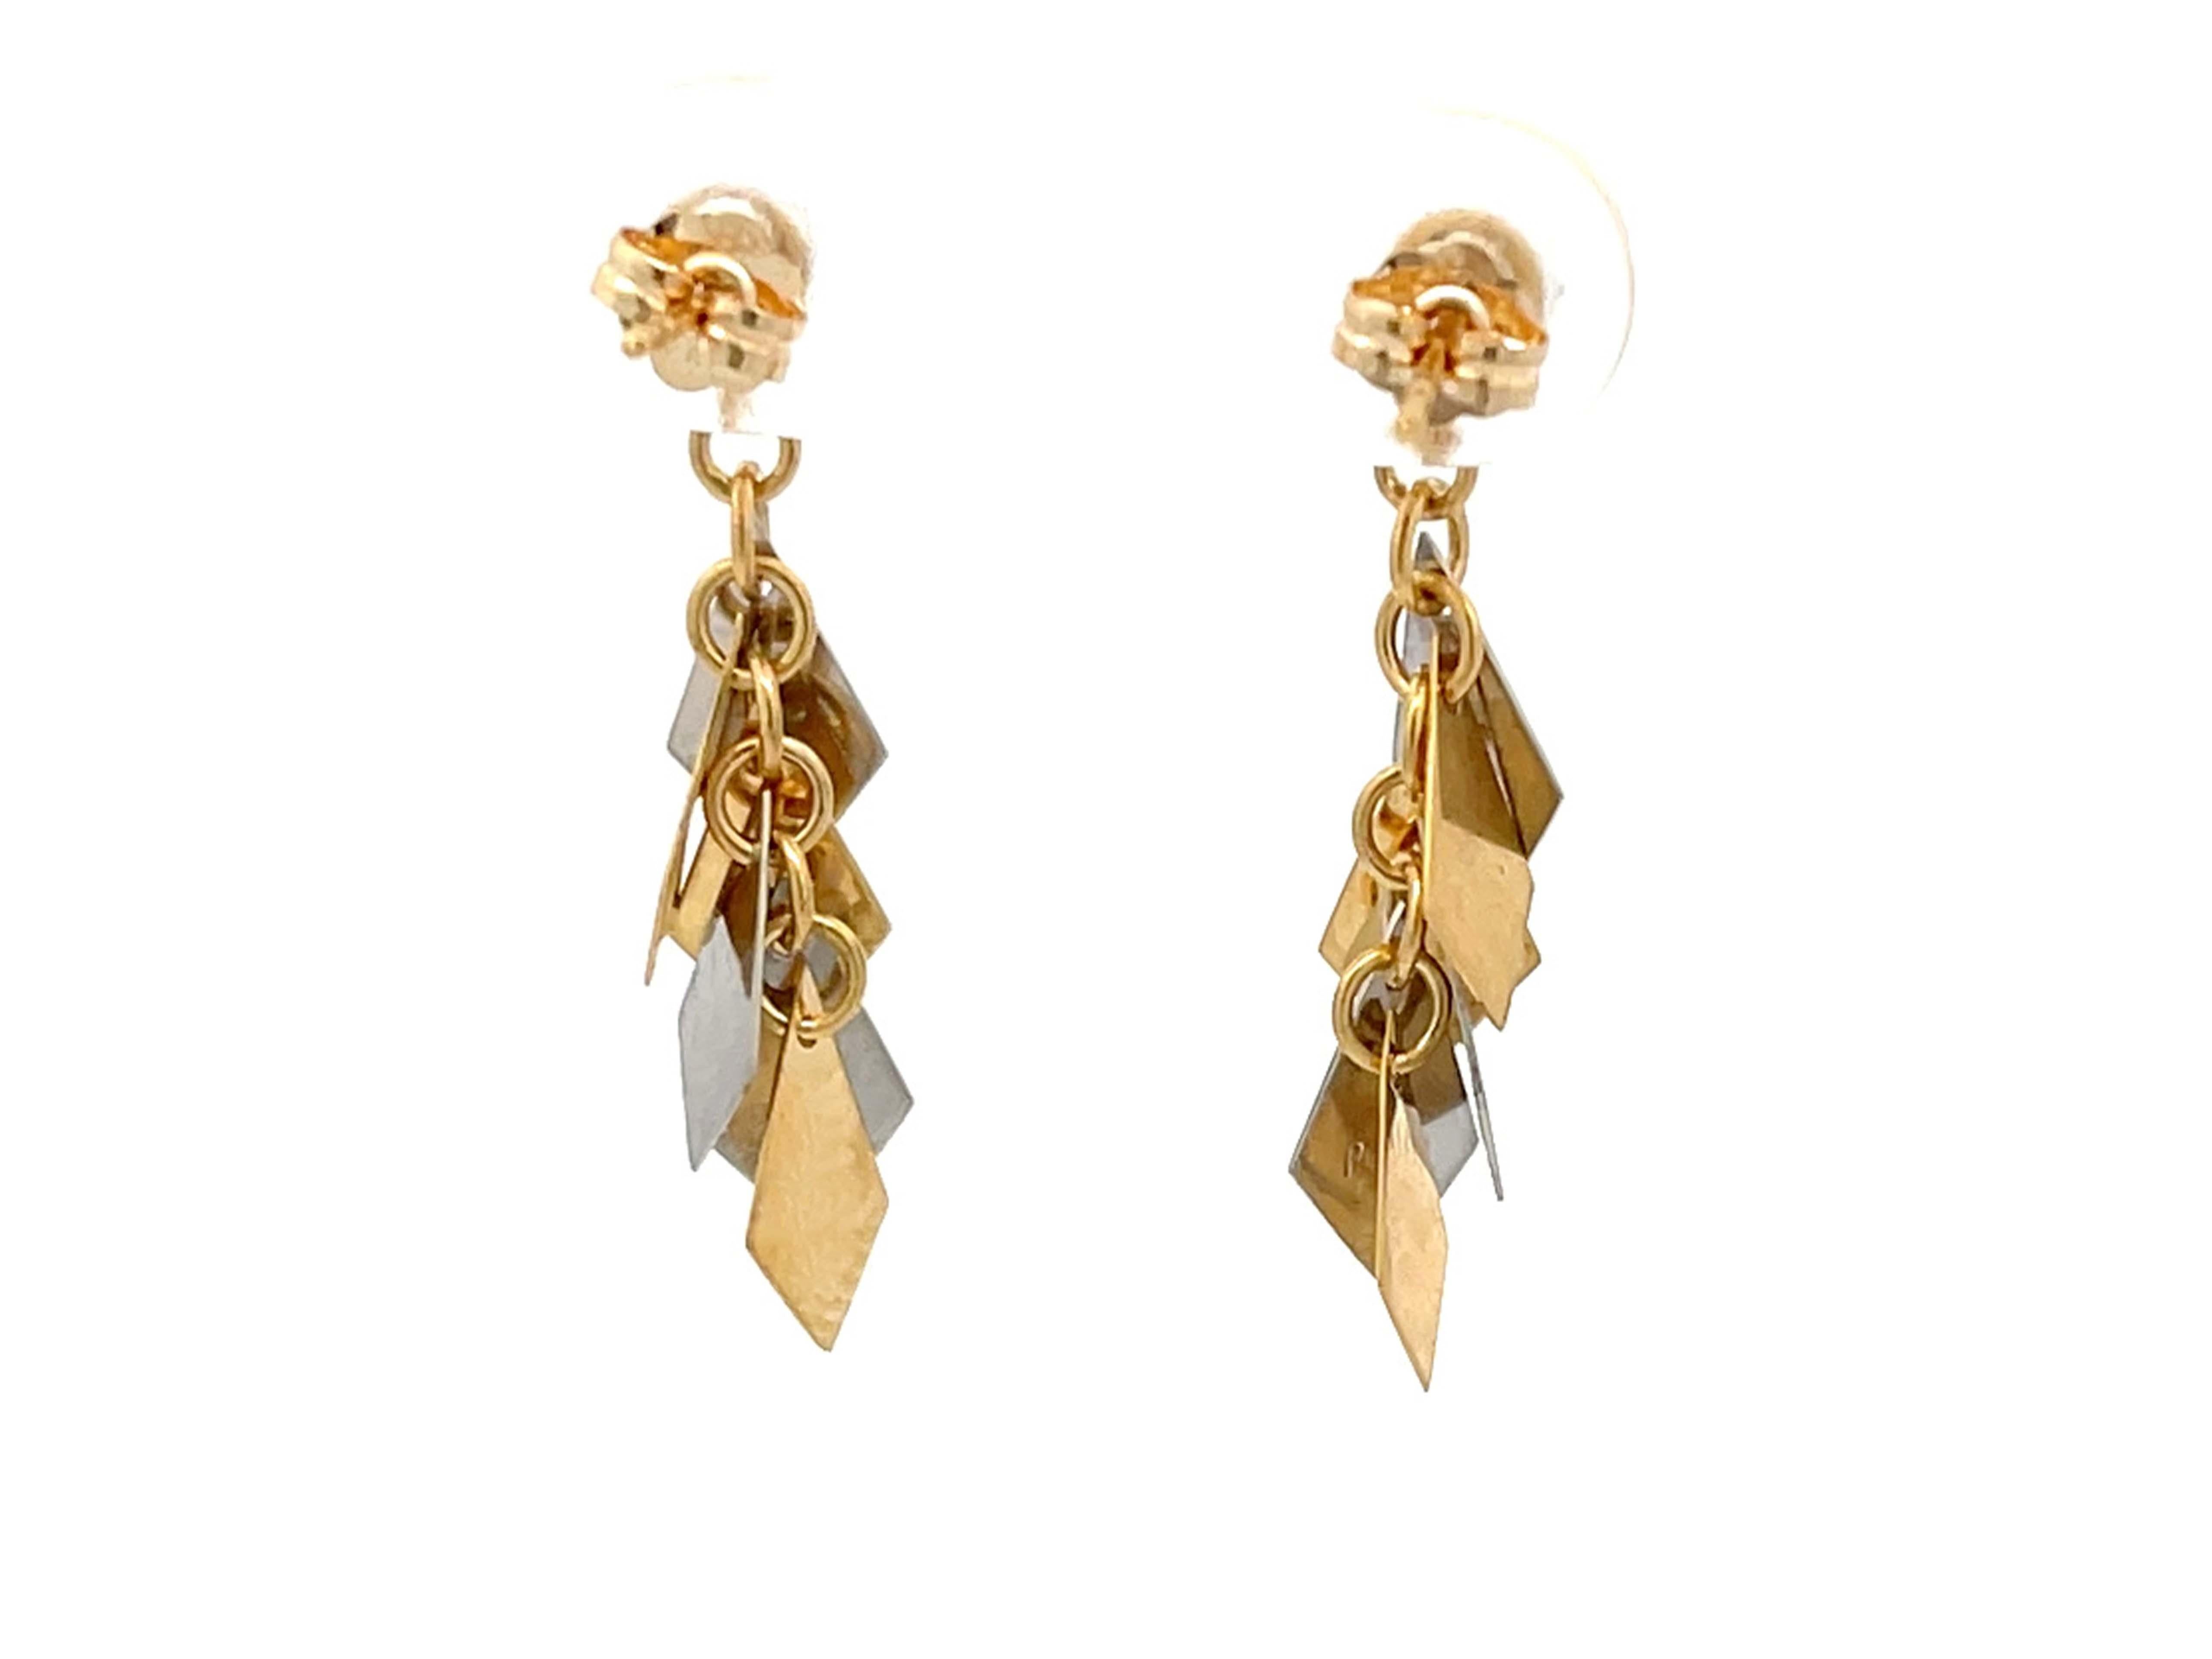 Two Toned Kite Shaped Dangly Earrings in Platinum and 18k Yellow Gold For Sale 2